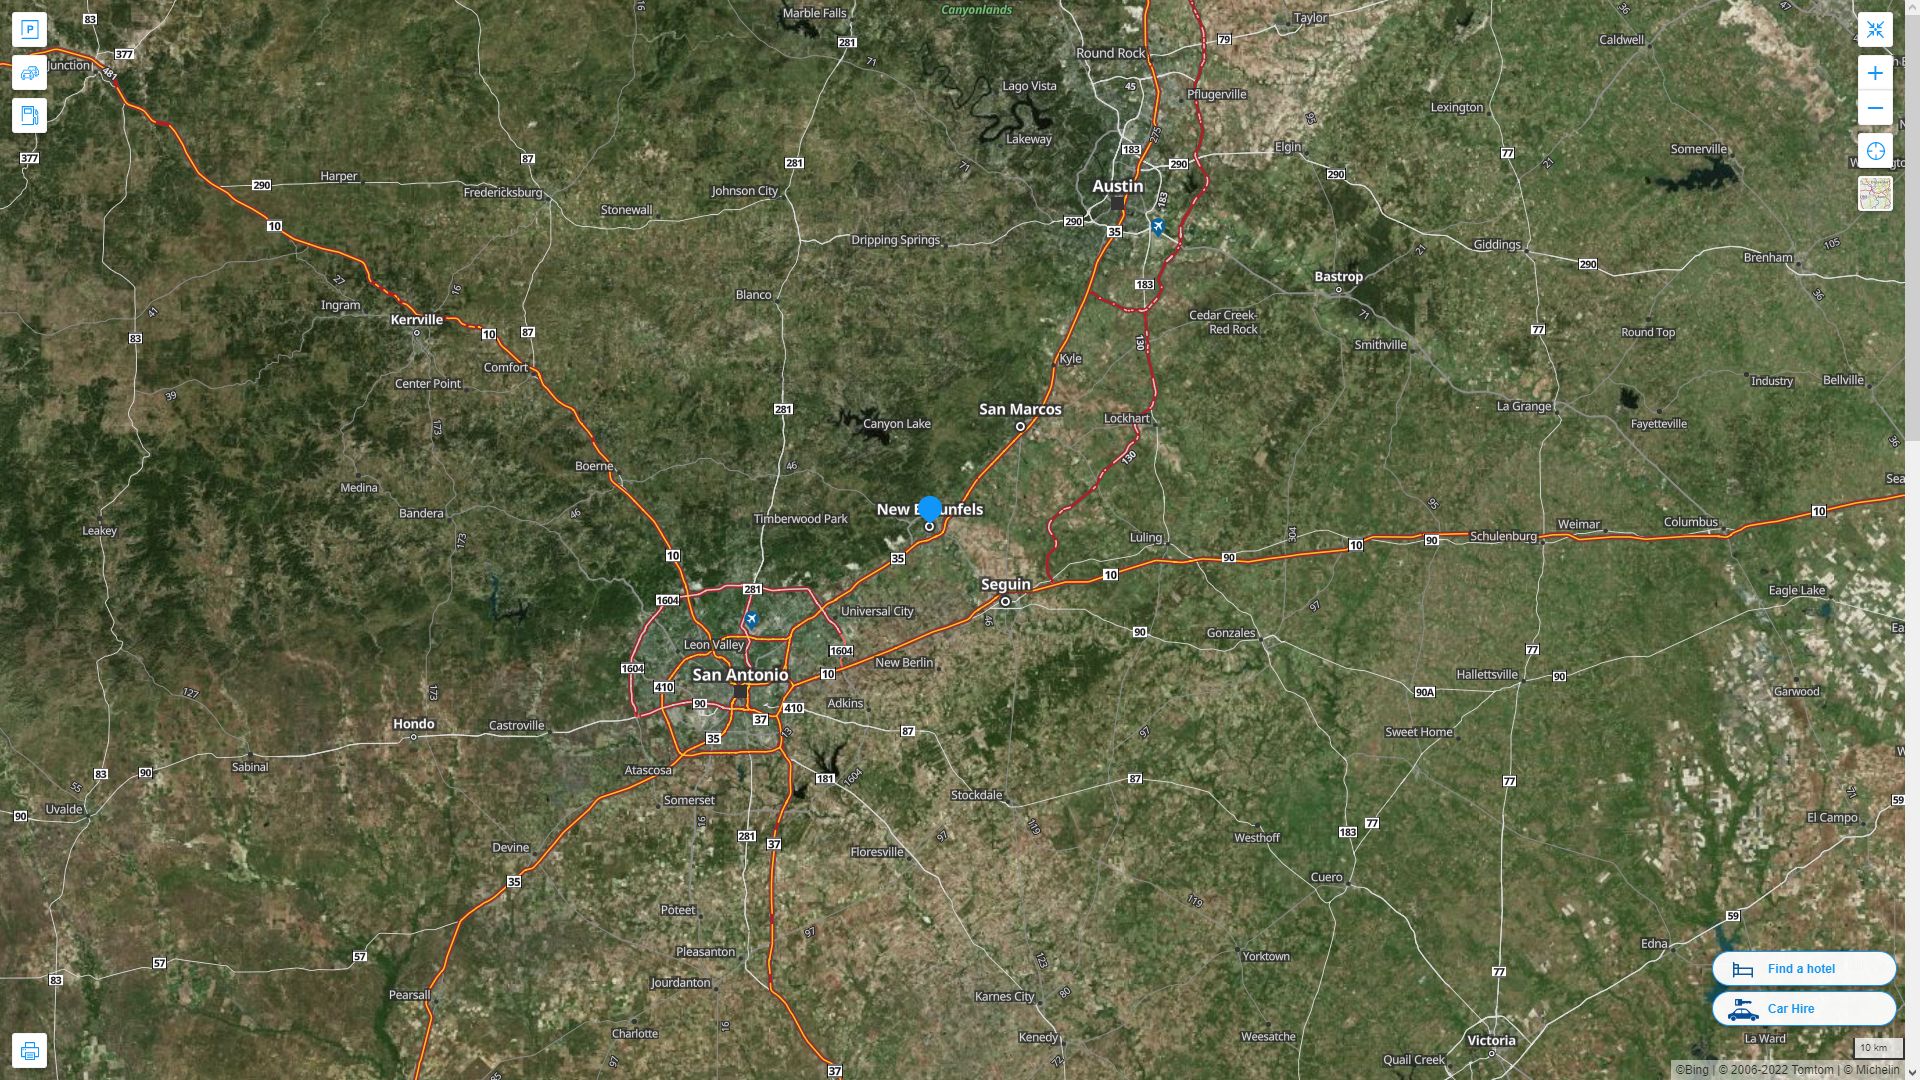 New Braunfels Texas Highway and Road Map with Satellite View